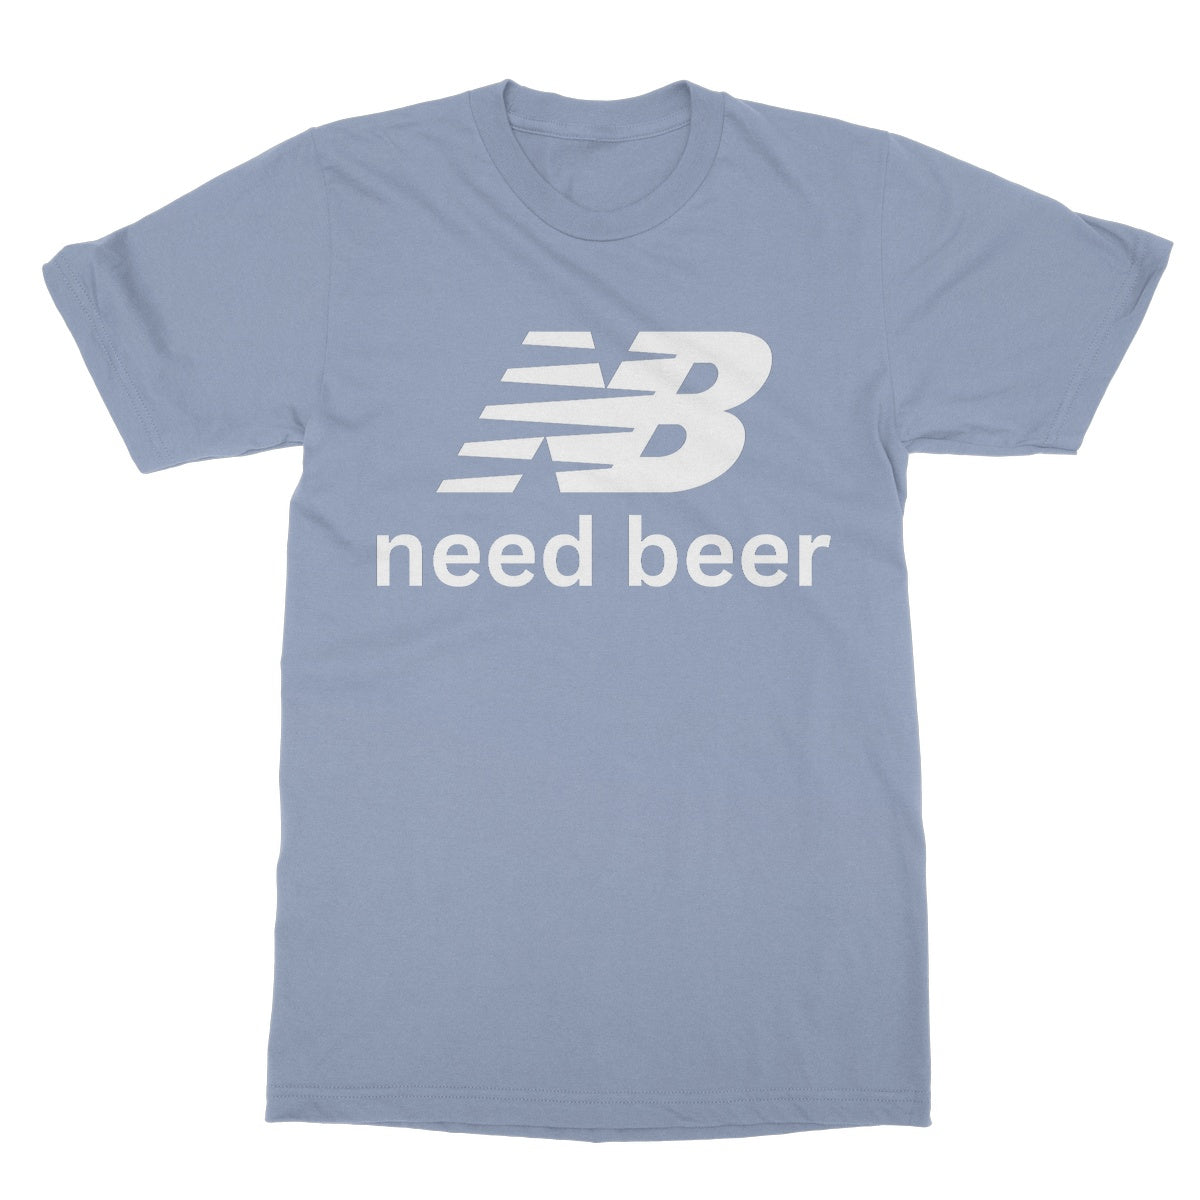 need beer t shirt blue